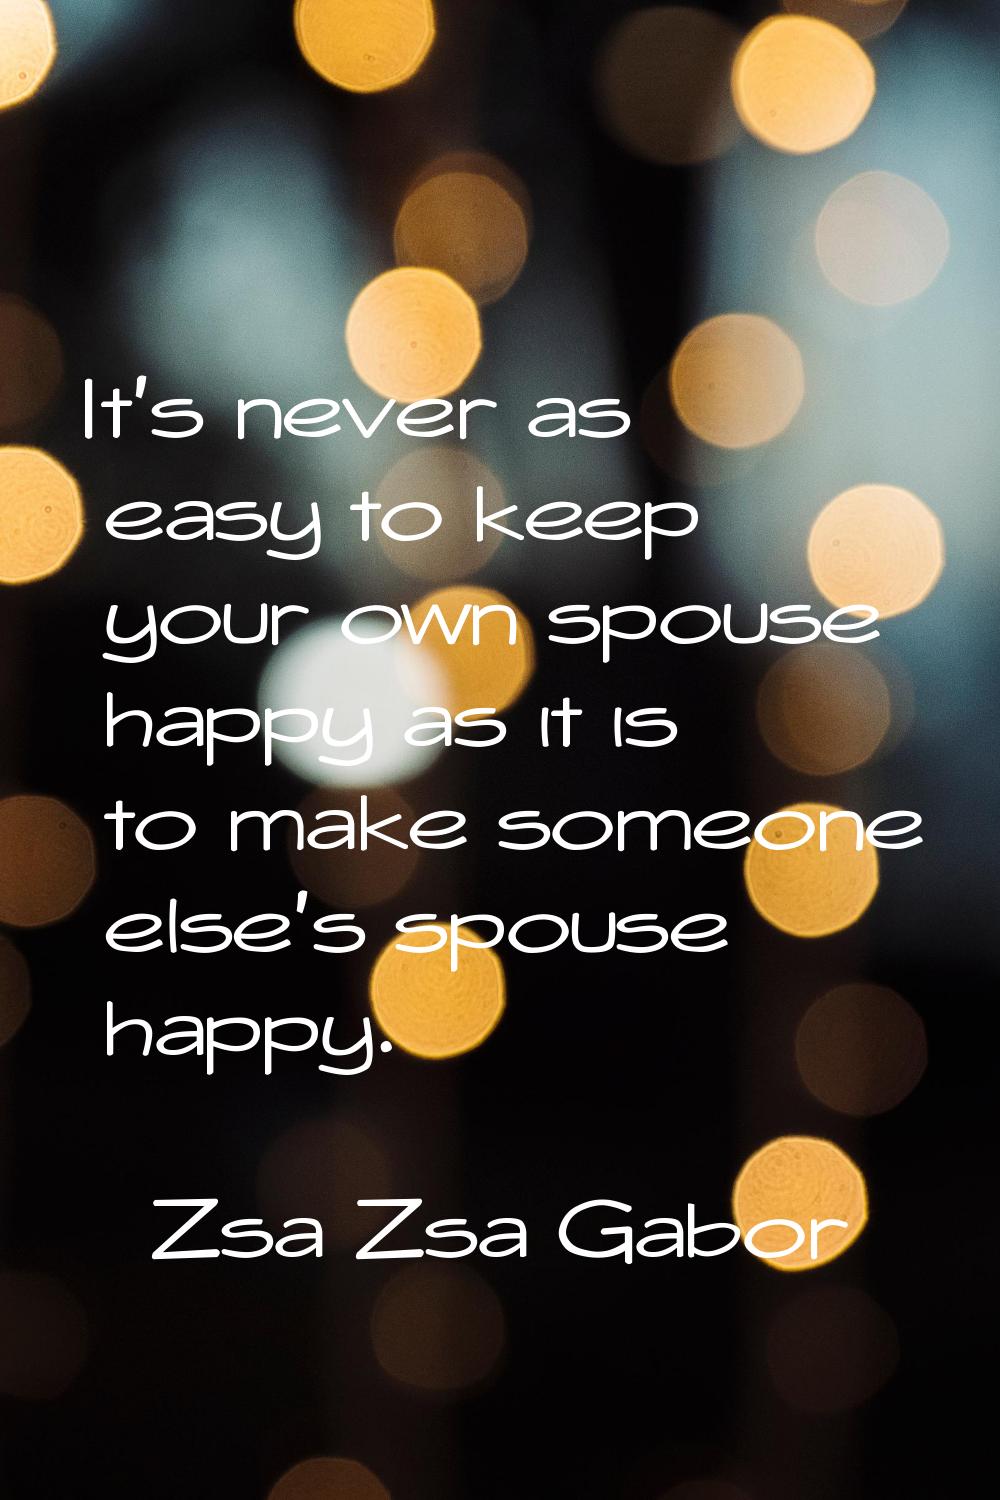 It's never as easy to keep your own spouse happy as it is to make someone else's spouse happy.